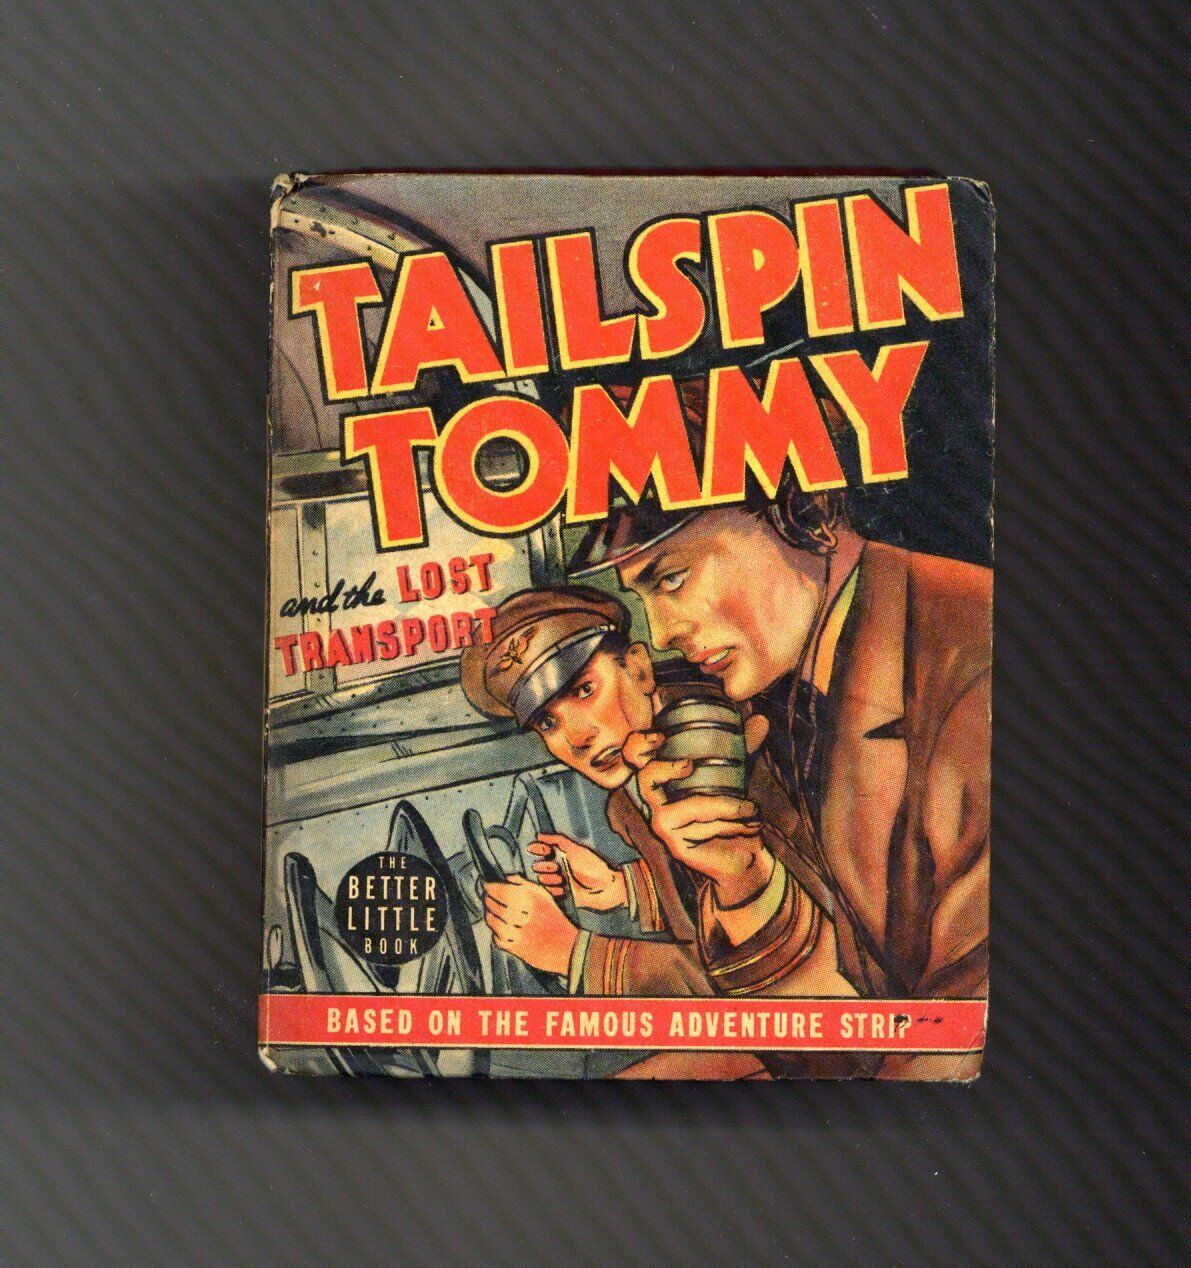 Tailspin Tommy and the Lost Transport #1413 FN/VF 7.0 1940